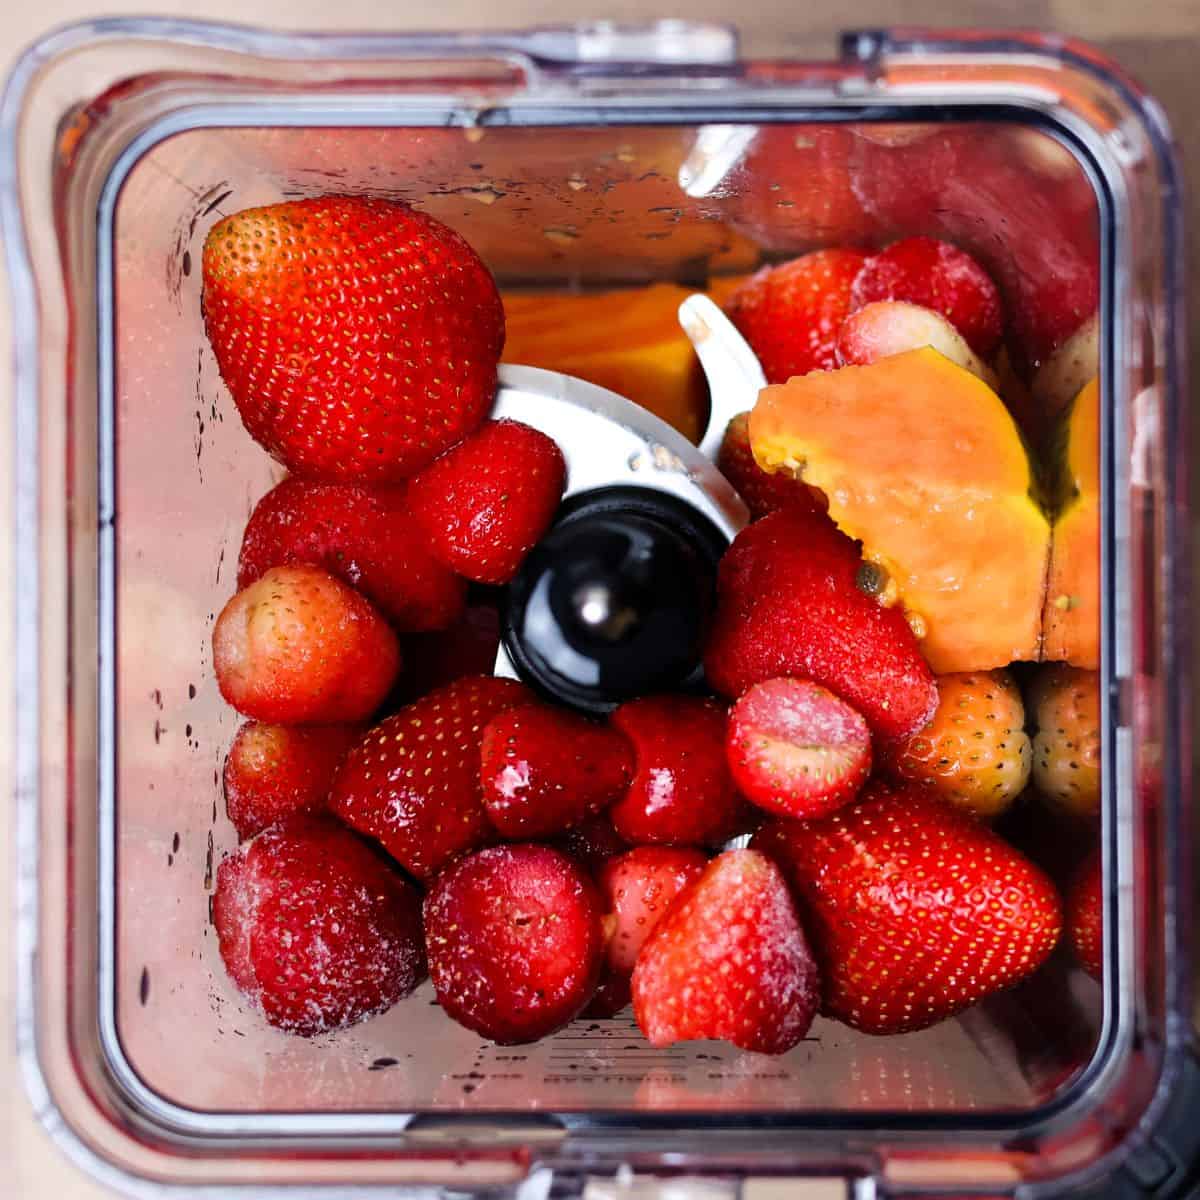 Top-down view of a blender with fresh strawberries, frozen strawberries, chunks of fresh papaya, and a splash of apple juice, ready for blending.